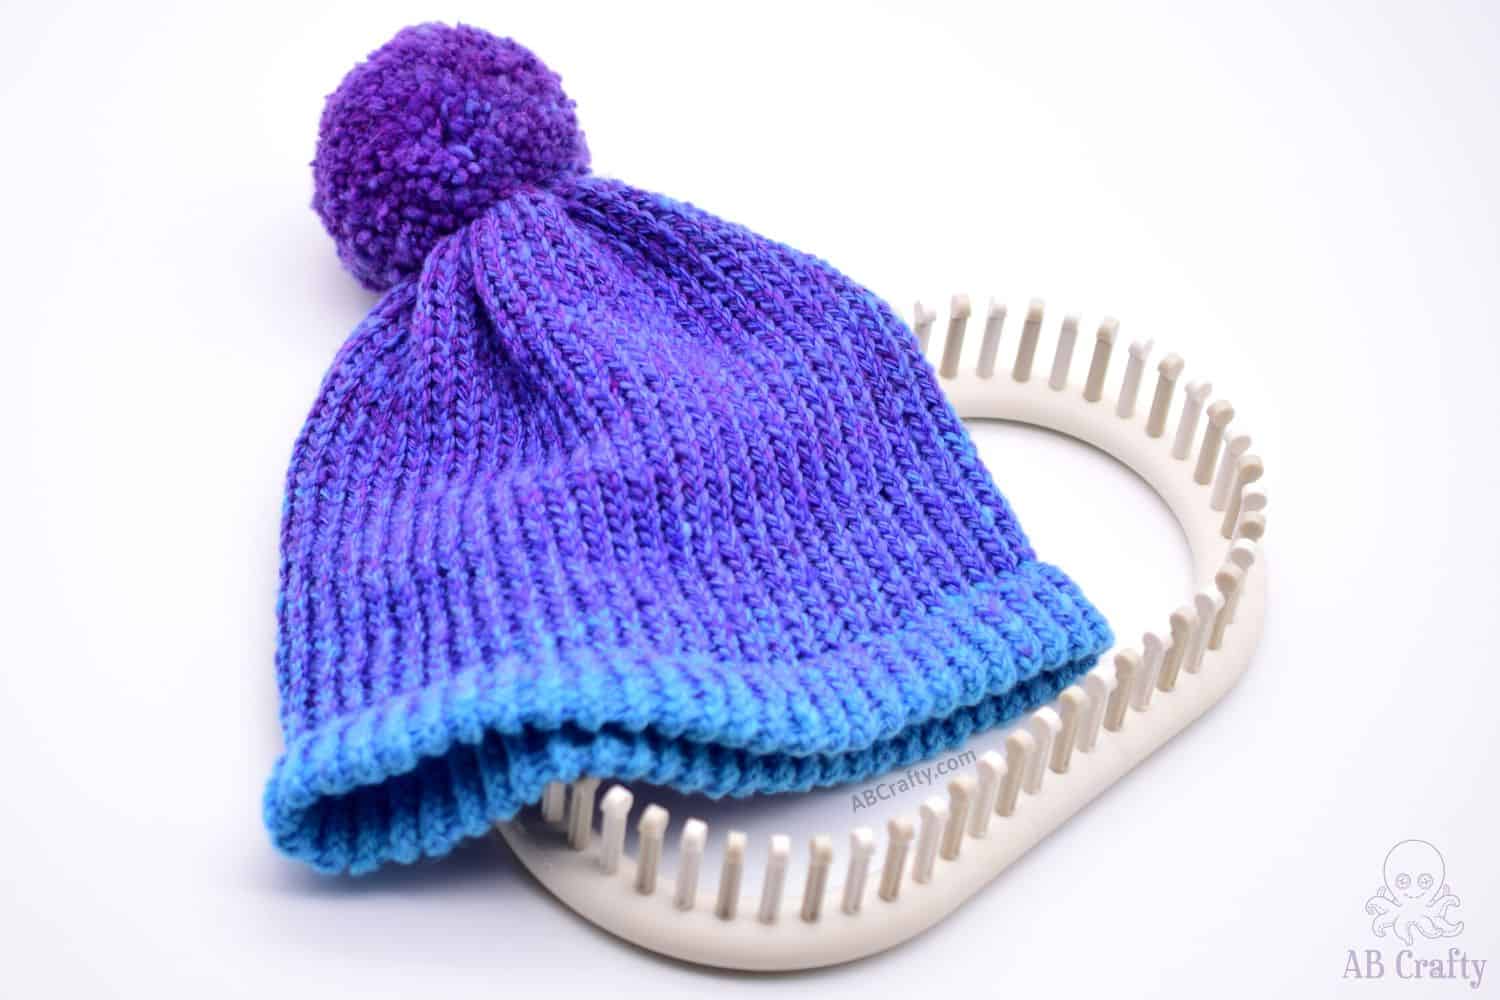 How to Loom Knit a Swirl Hat (SUPER EASY for beginners) DIY Tutorial 